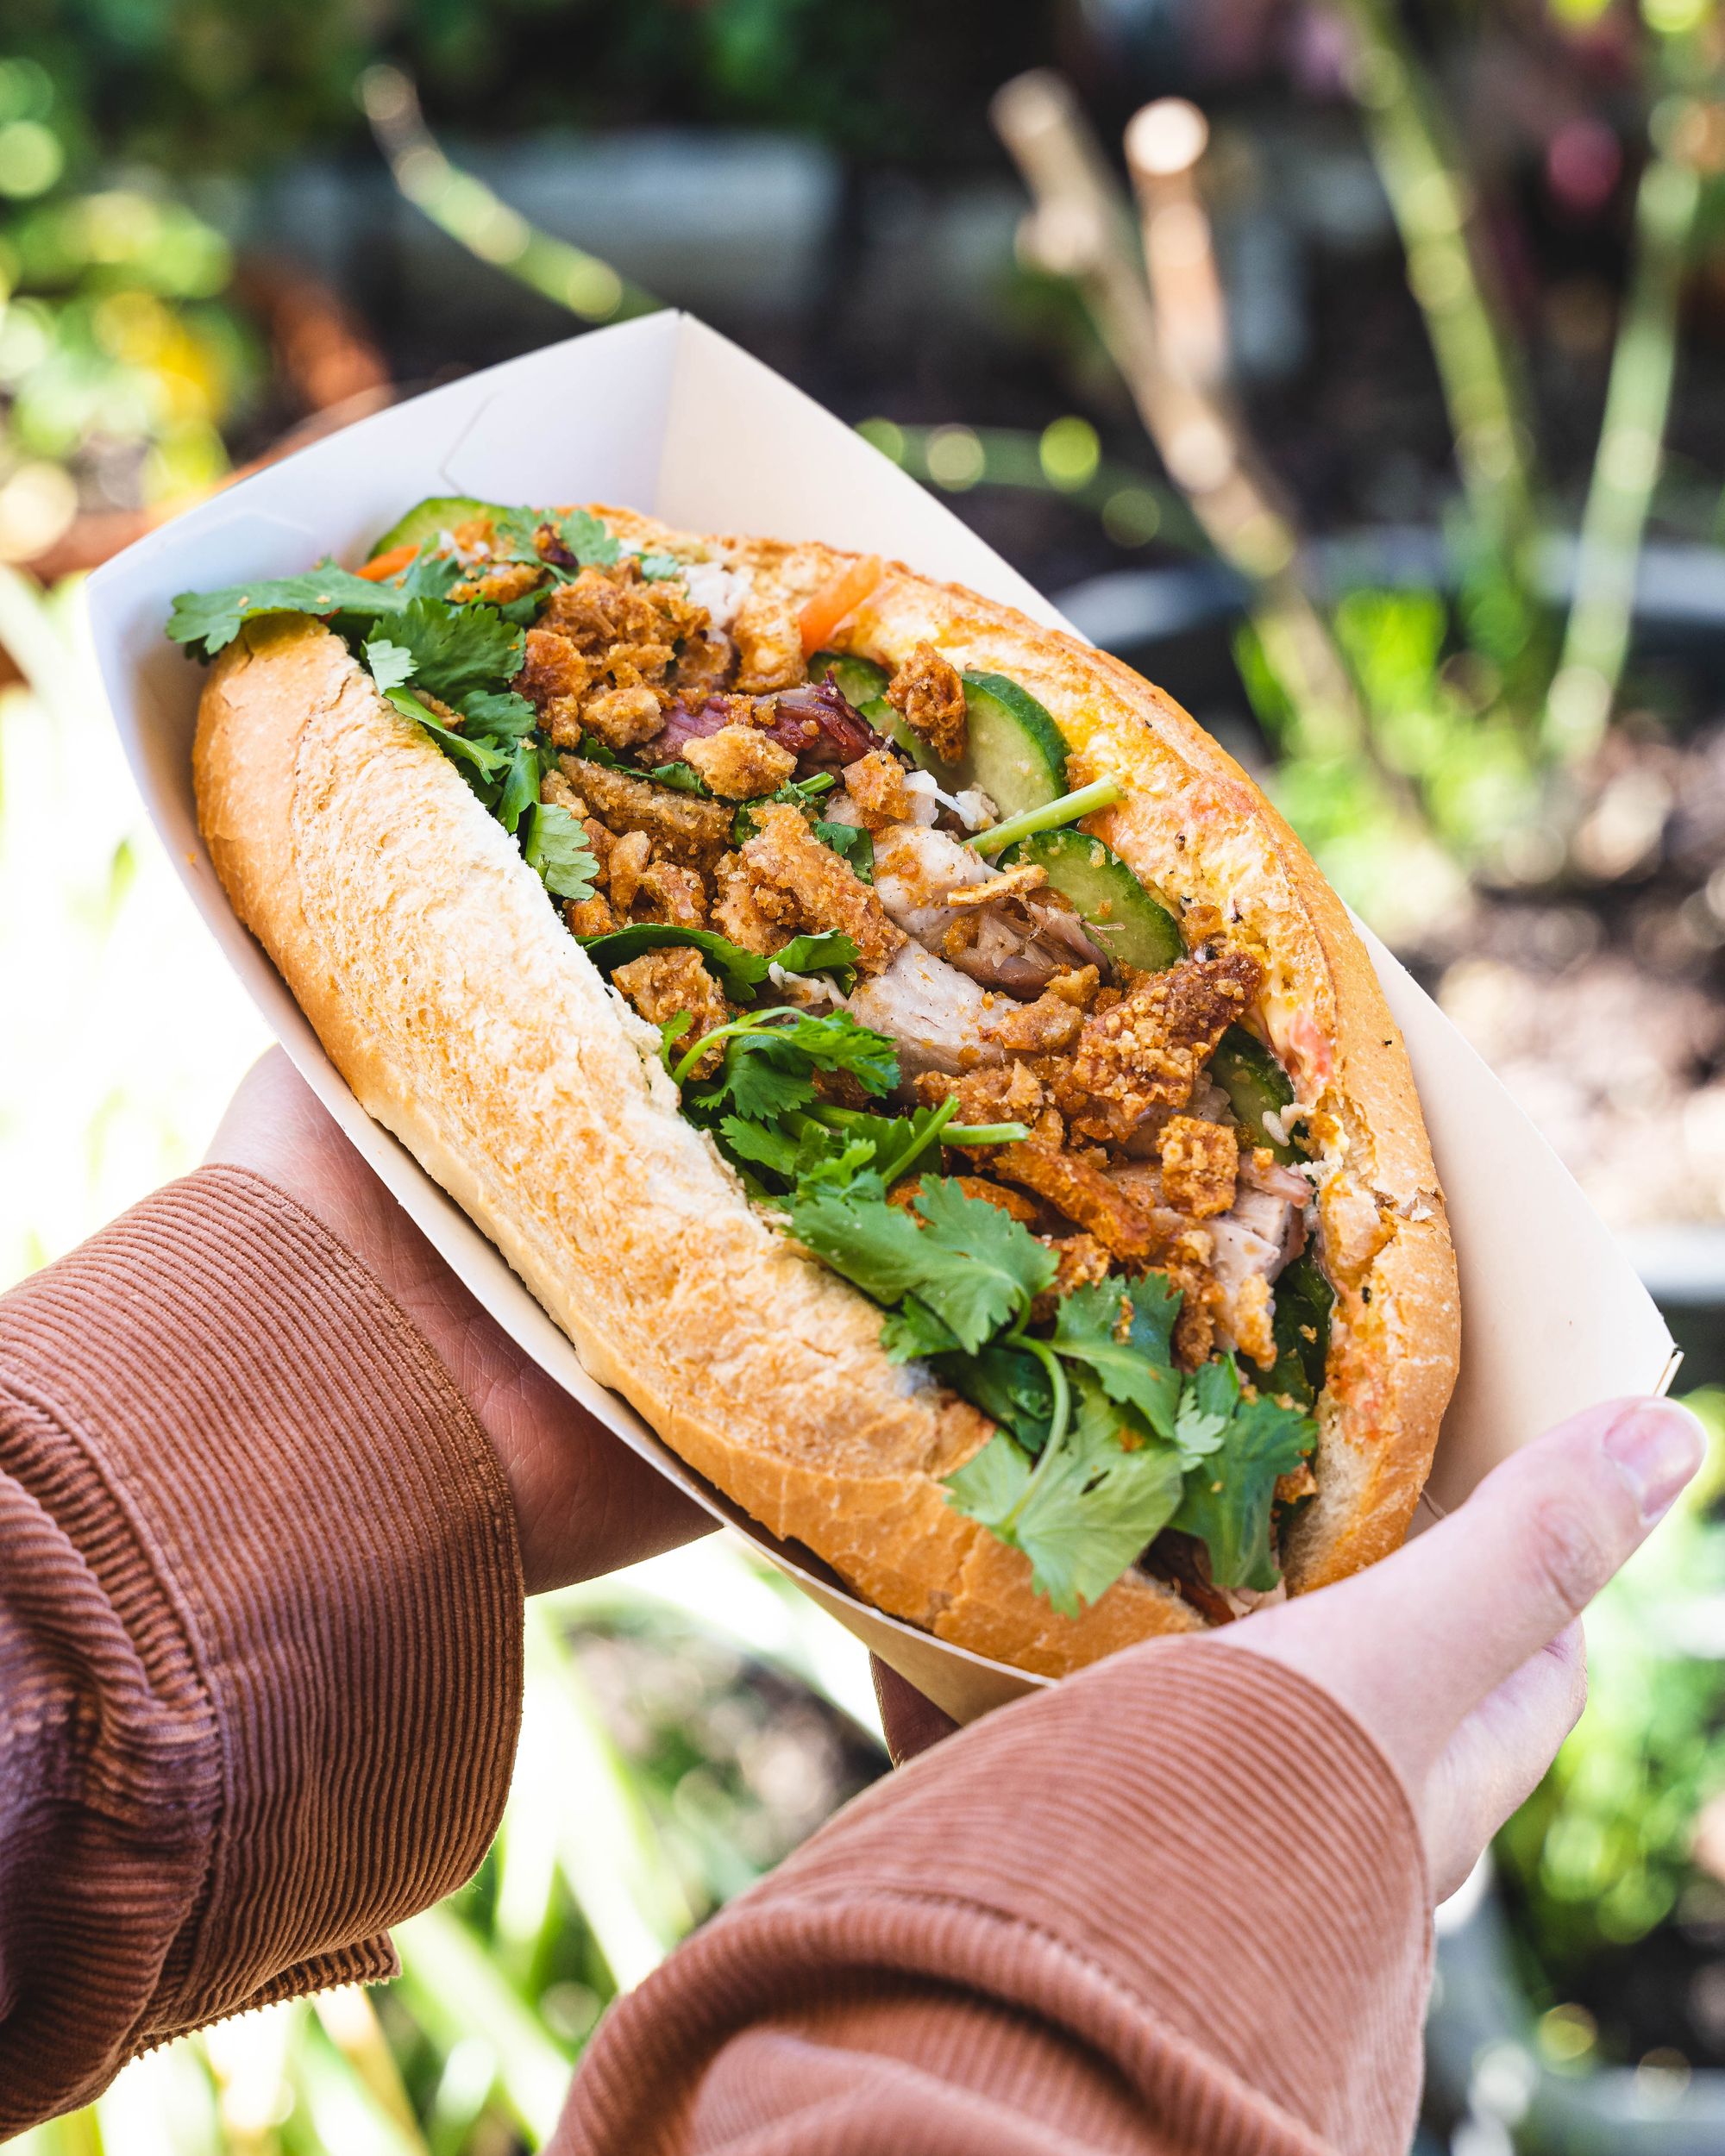 Hand holding banh mi with roasted pork